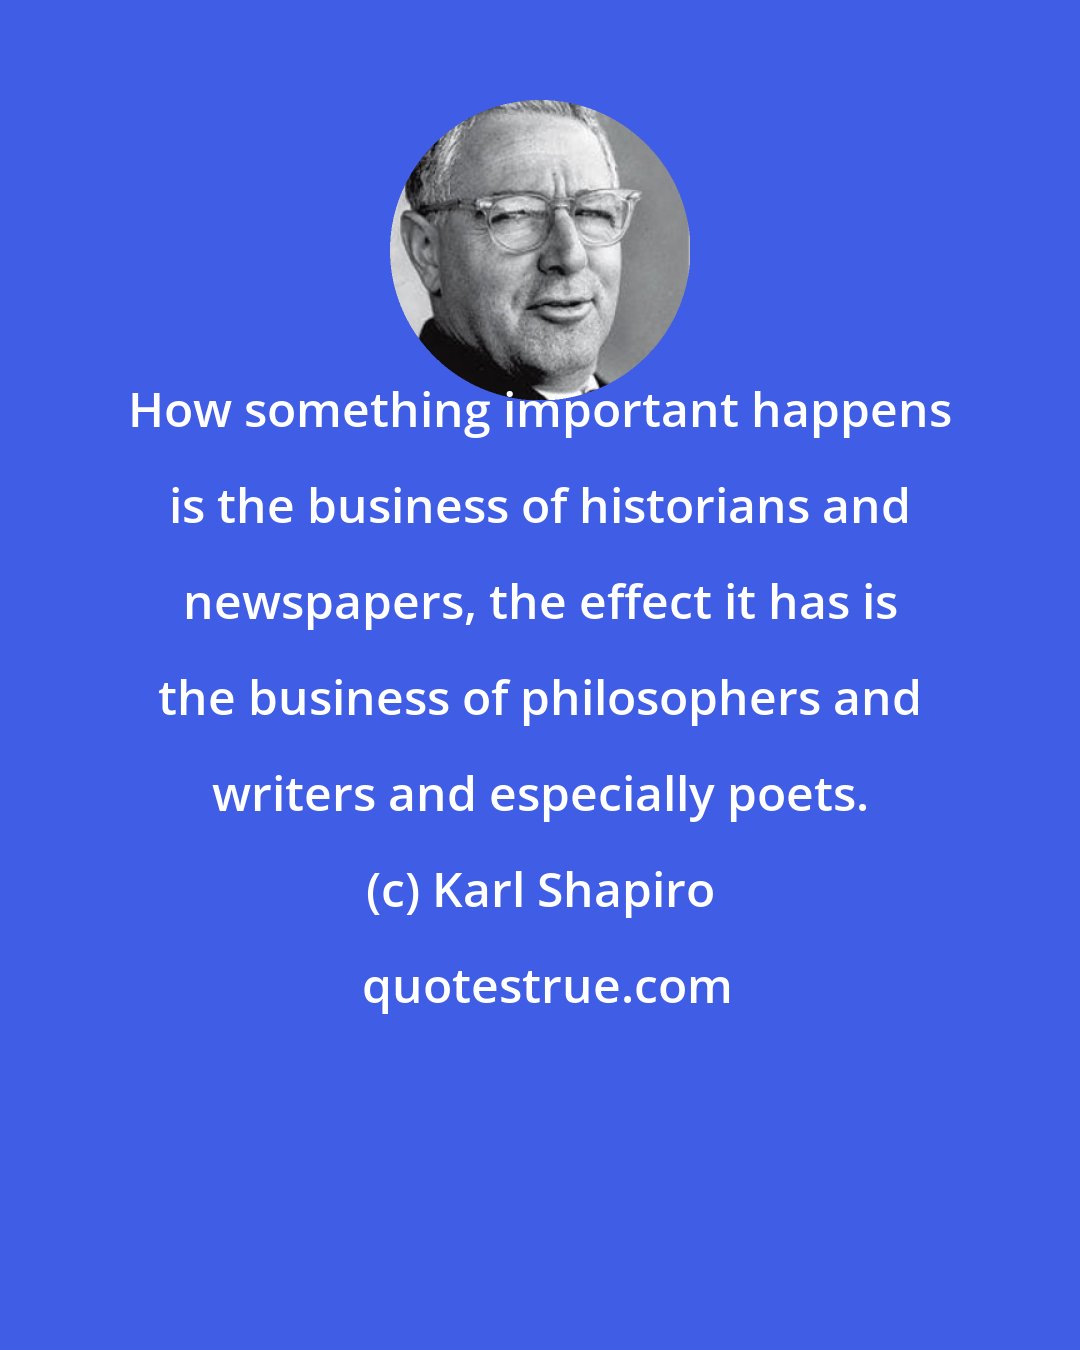 Karl Shapiro: How something important happens is the business of historians and newspapers, the effect it has is the business of philosophers and writers and especially poets.